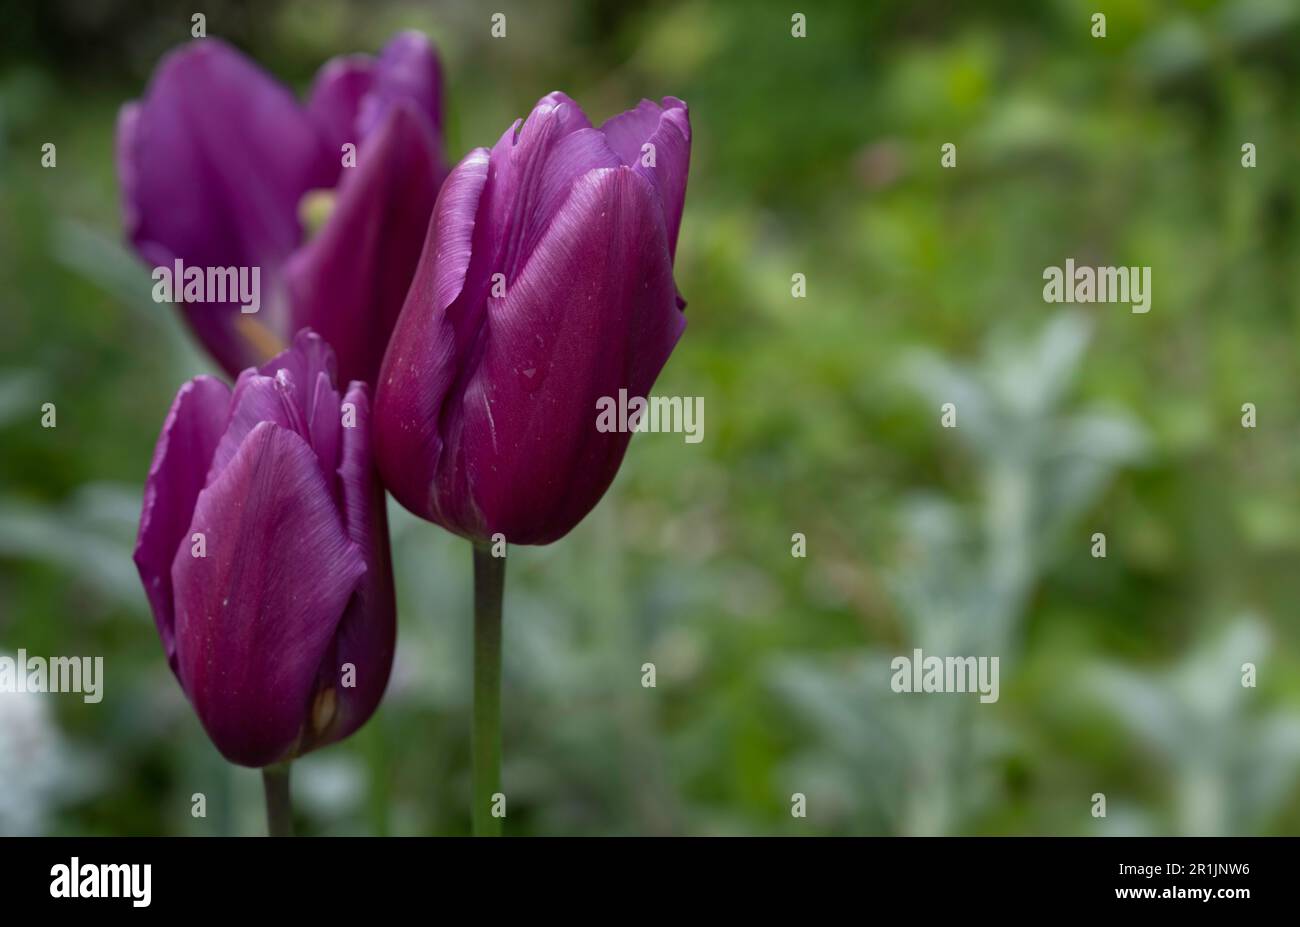 Some purple tulips in a field with green blurred background Stock Photo